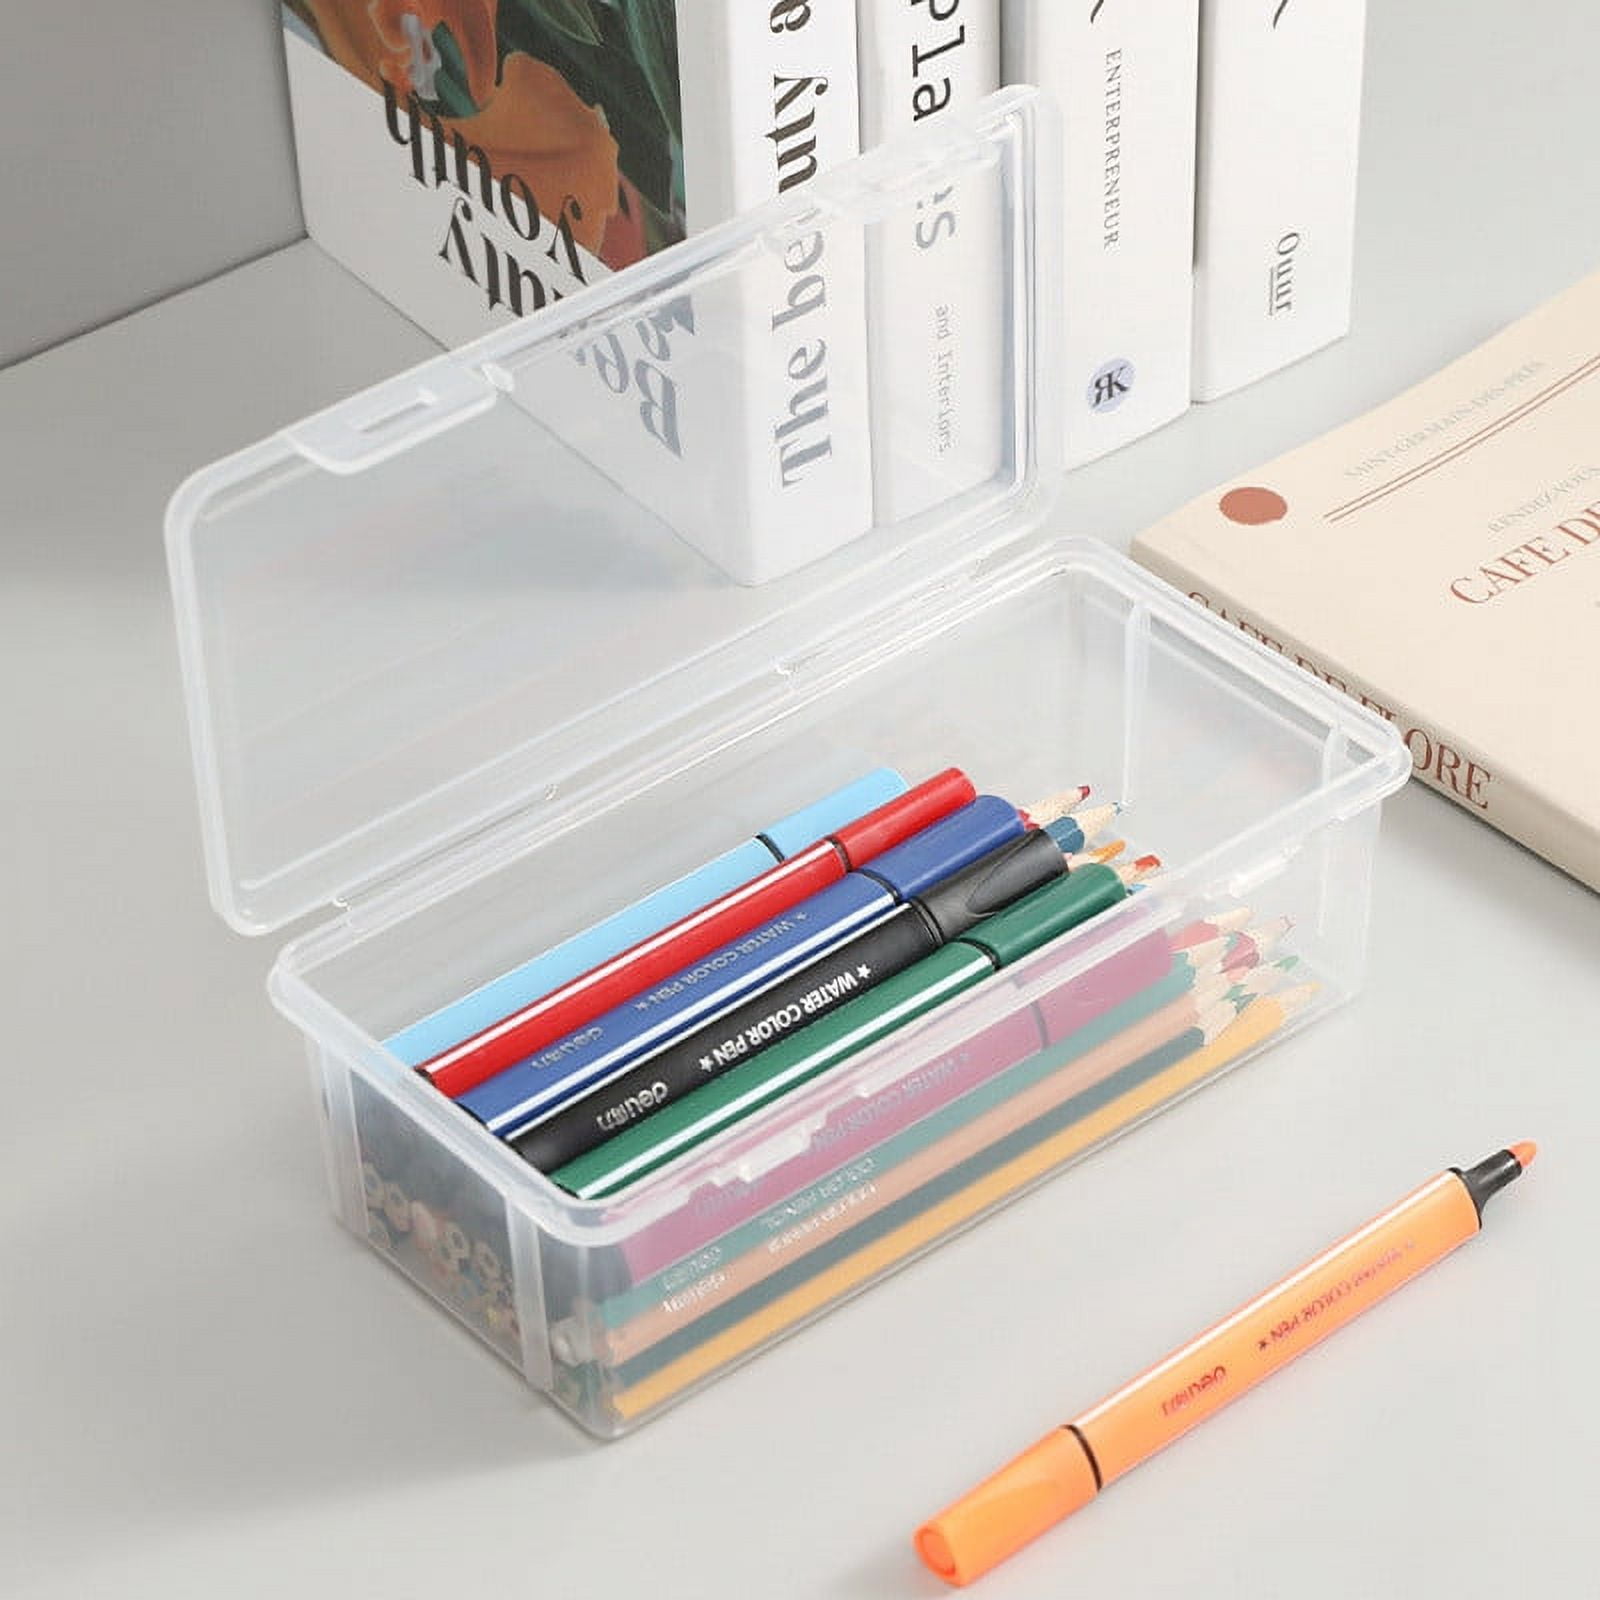 T Tulead White Plastic Pencil Boxes Stationery Box Storage Case Pack of 2  for Pencil,Pen,Ruler